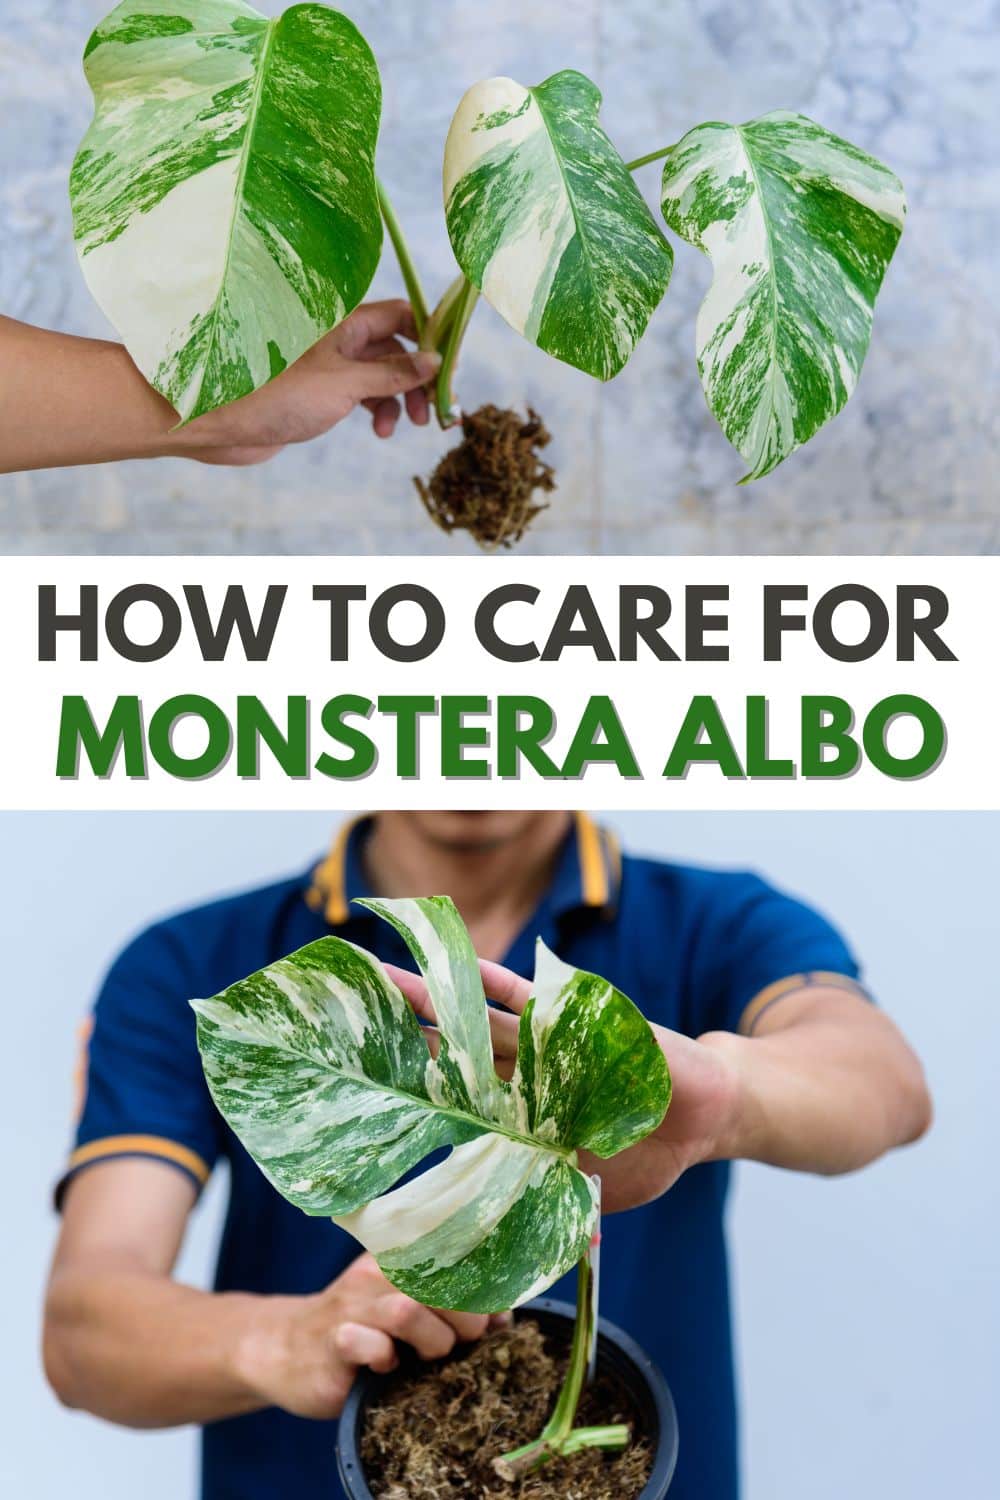 Elevate your houseplant collection with a beautiful monstera albo! Learn how to care for the variegated monstera with our indoor growing tips. #monsteraalbo #monsteraplant #houseplant #tropicalplant #rareplant via @wondermomwannab